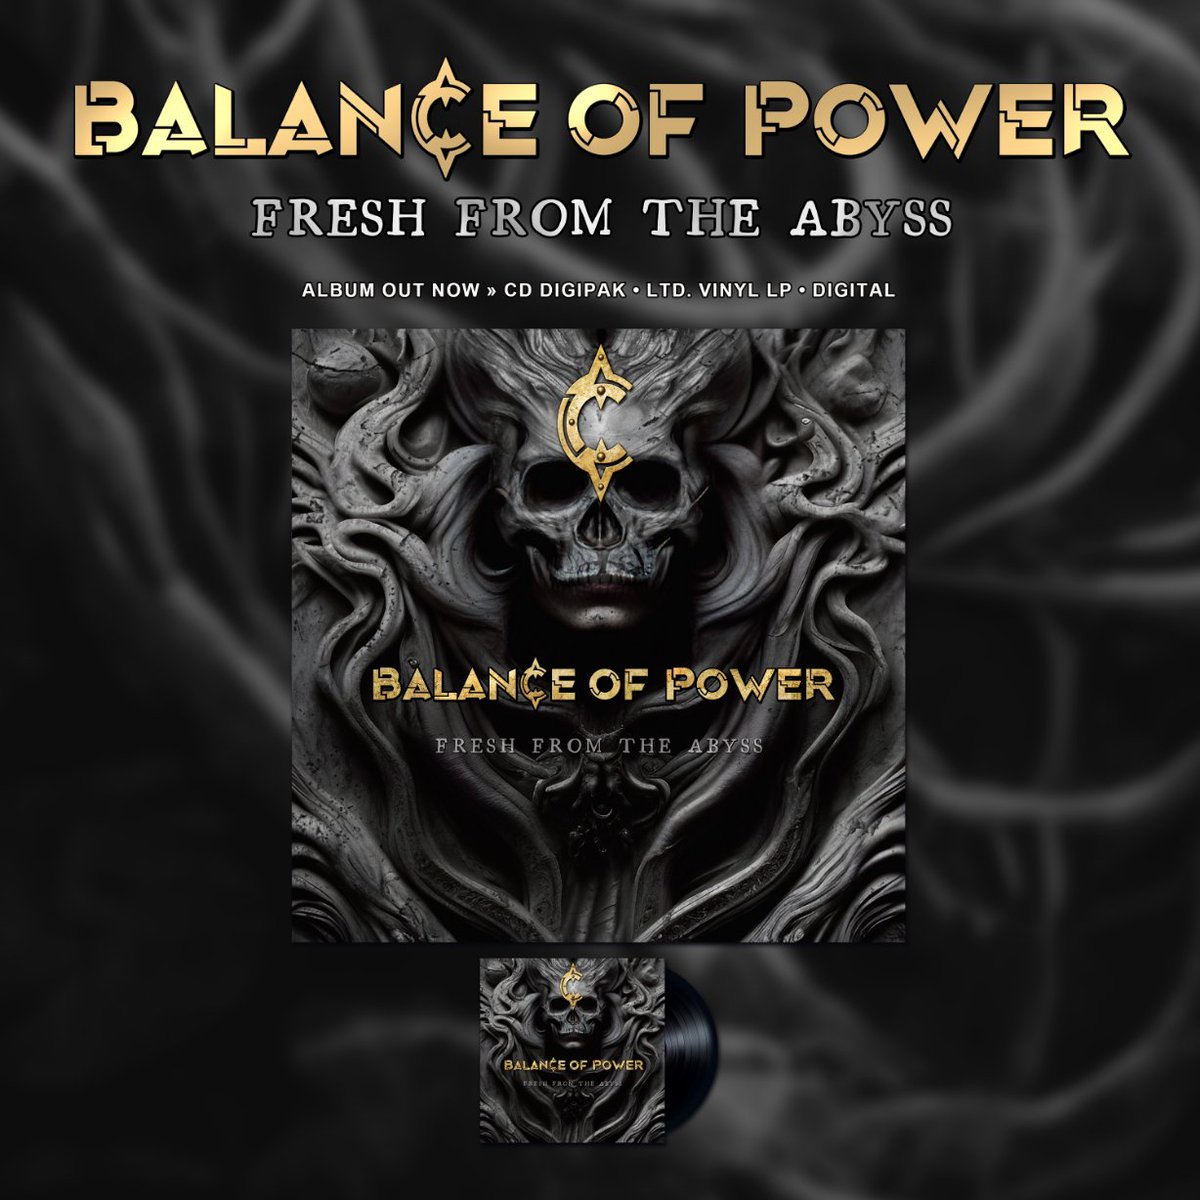 BALANCE OF POWER's new album 'Fresh From The Abyss' is out now! You'll find CD Digipak and limited edition vinyl LP order options as well as album streaming links on lnk.to/freshfromtheab… #metal #hardrock